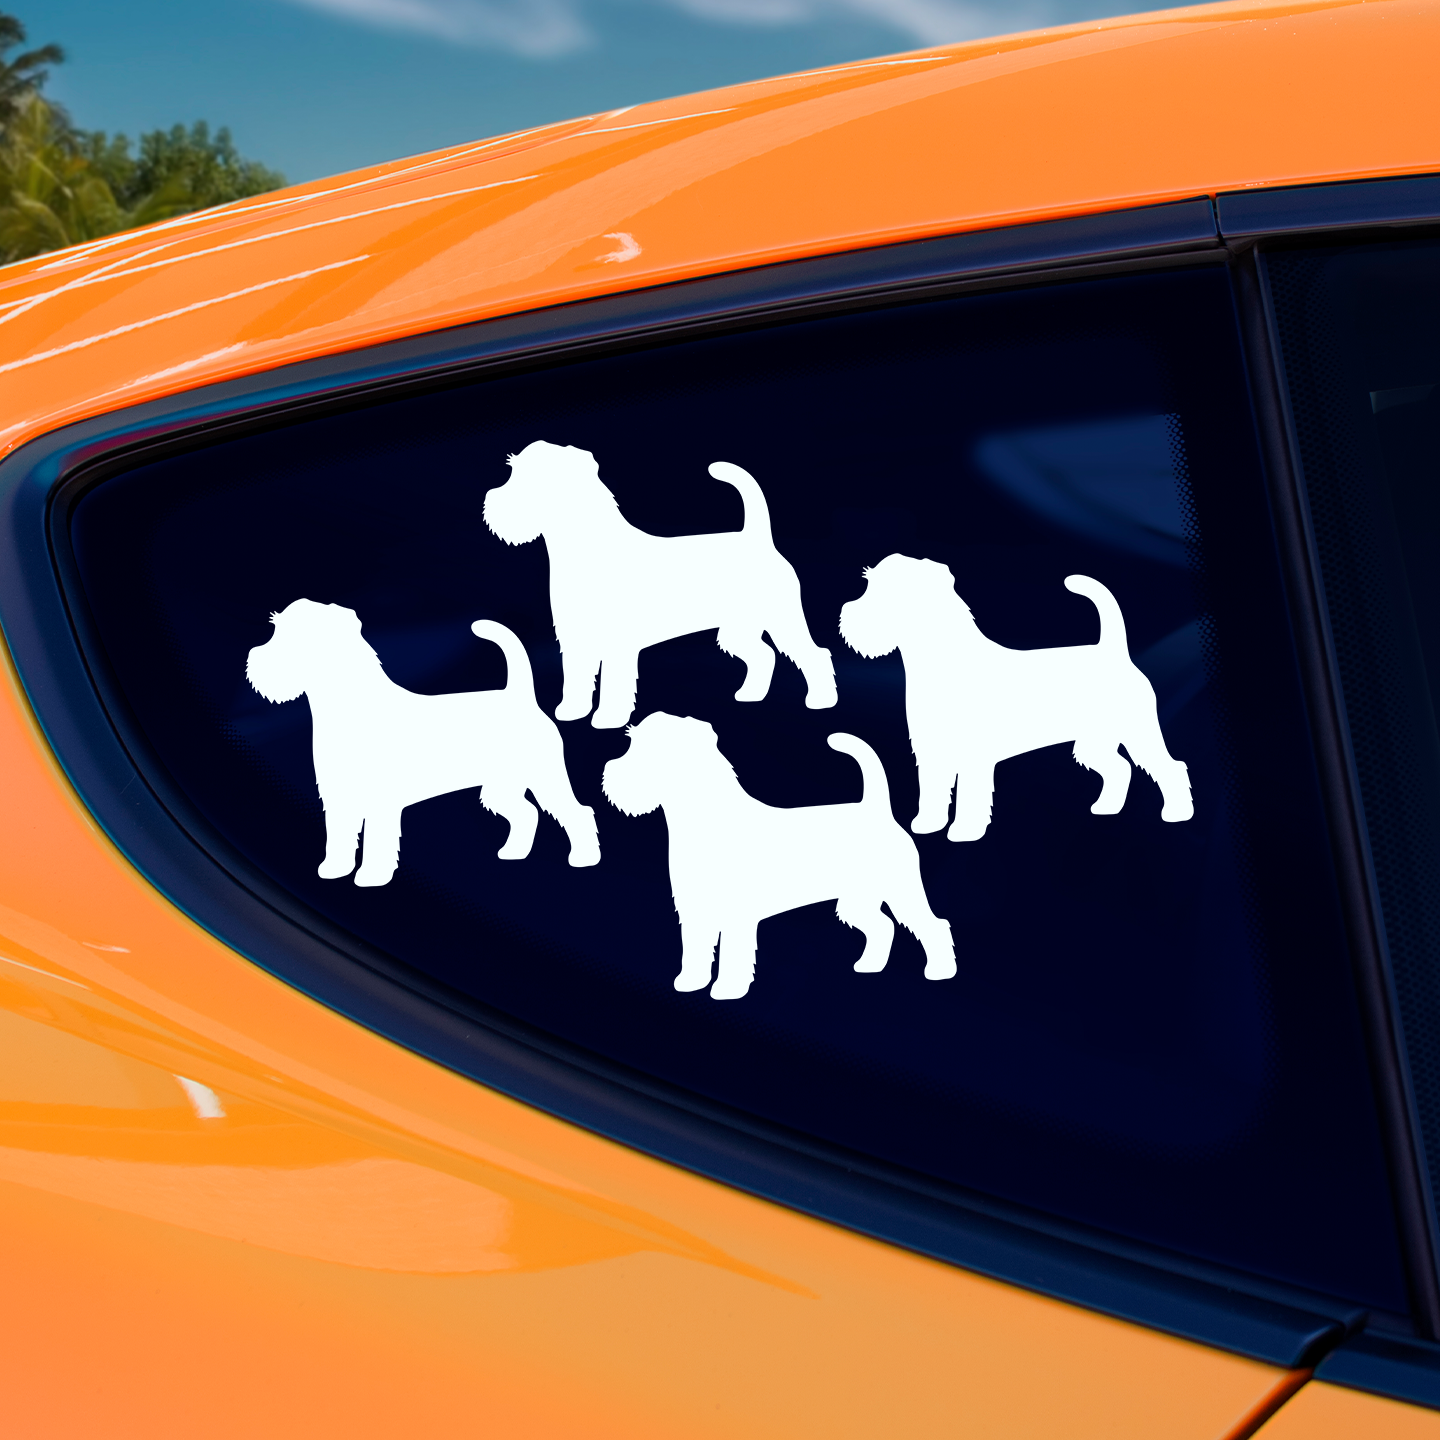 Jack Russell Silhouette Stickers